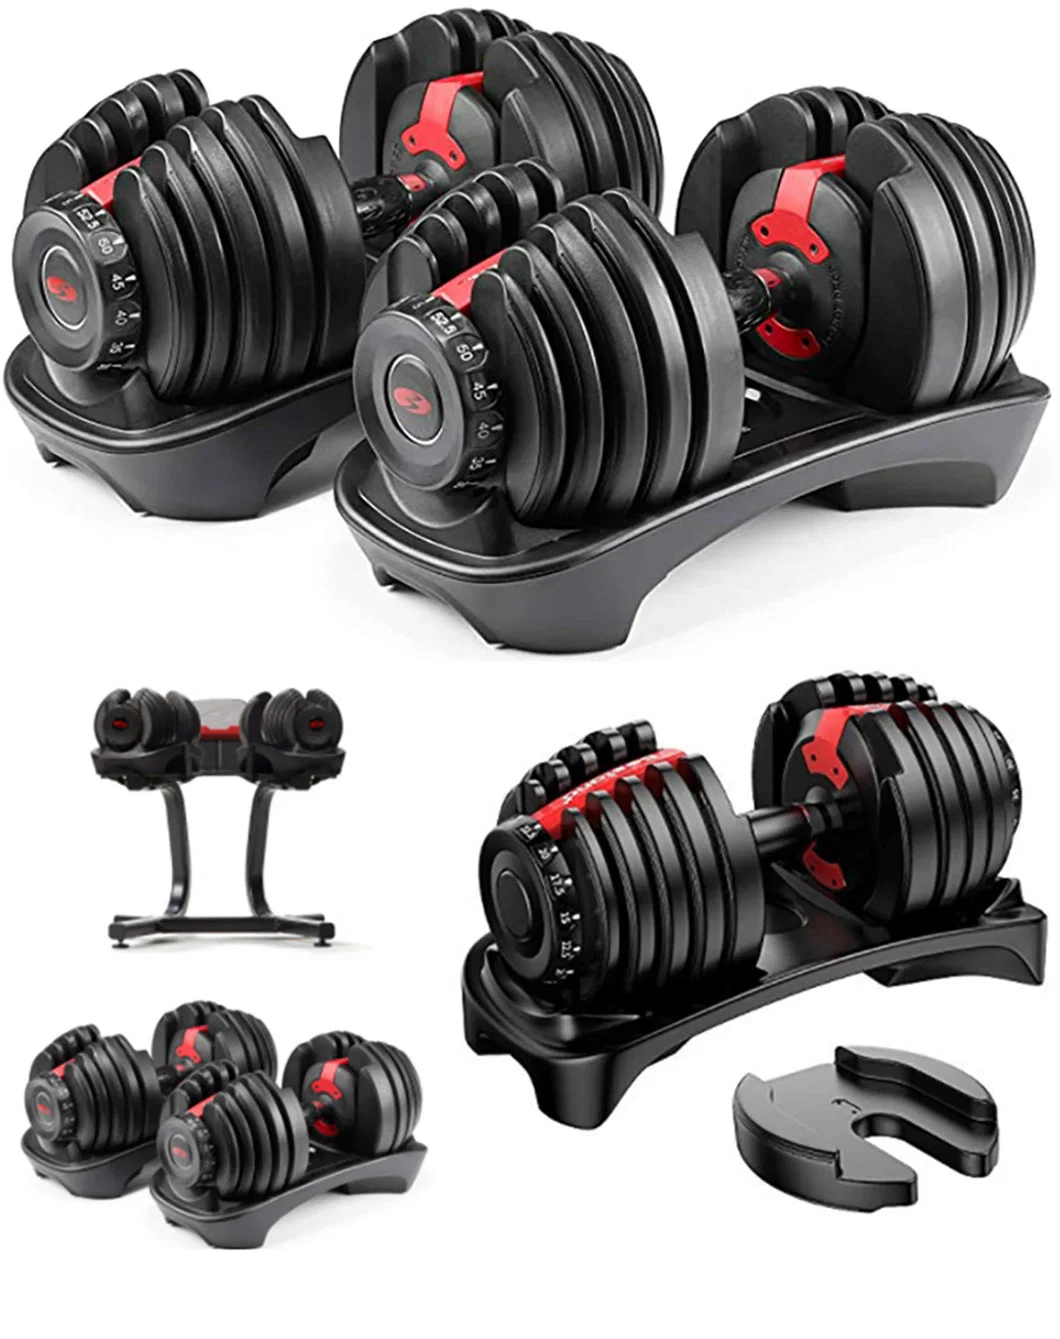 24kg Multiple Weight Gym Fitness Equipment Adjustable Dumbbell Set for Body Muscle Building